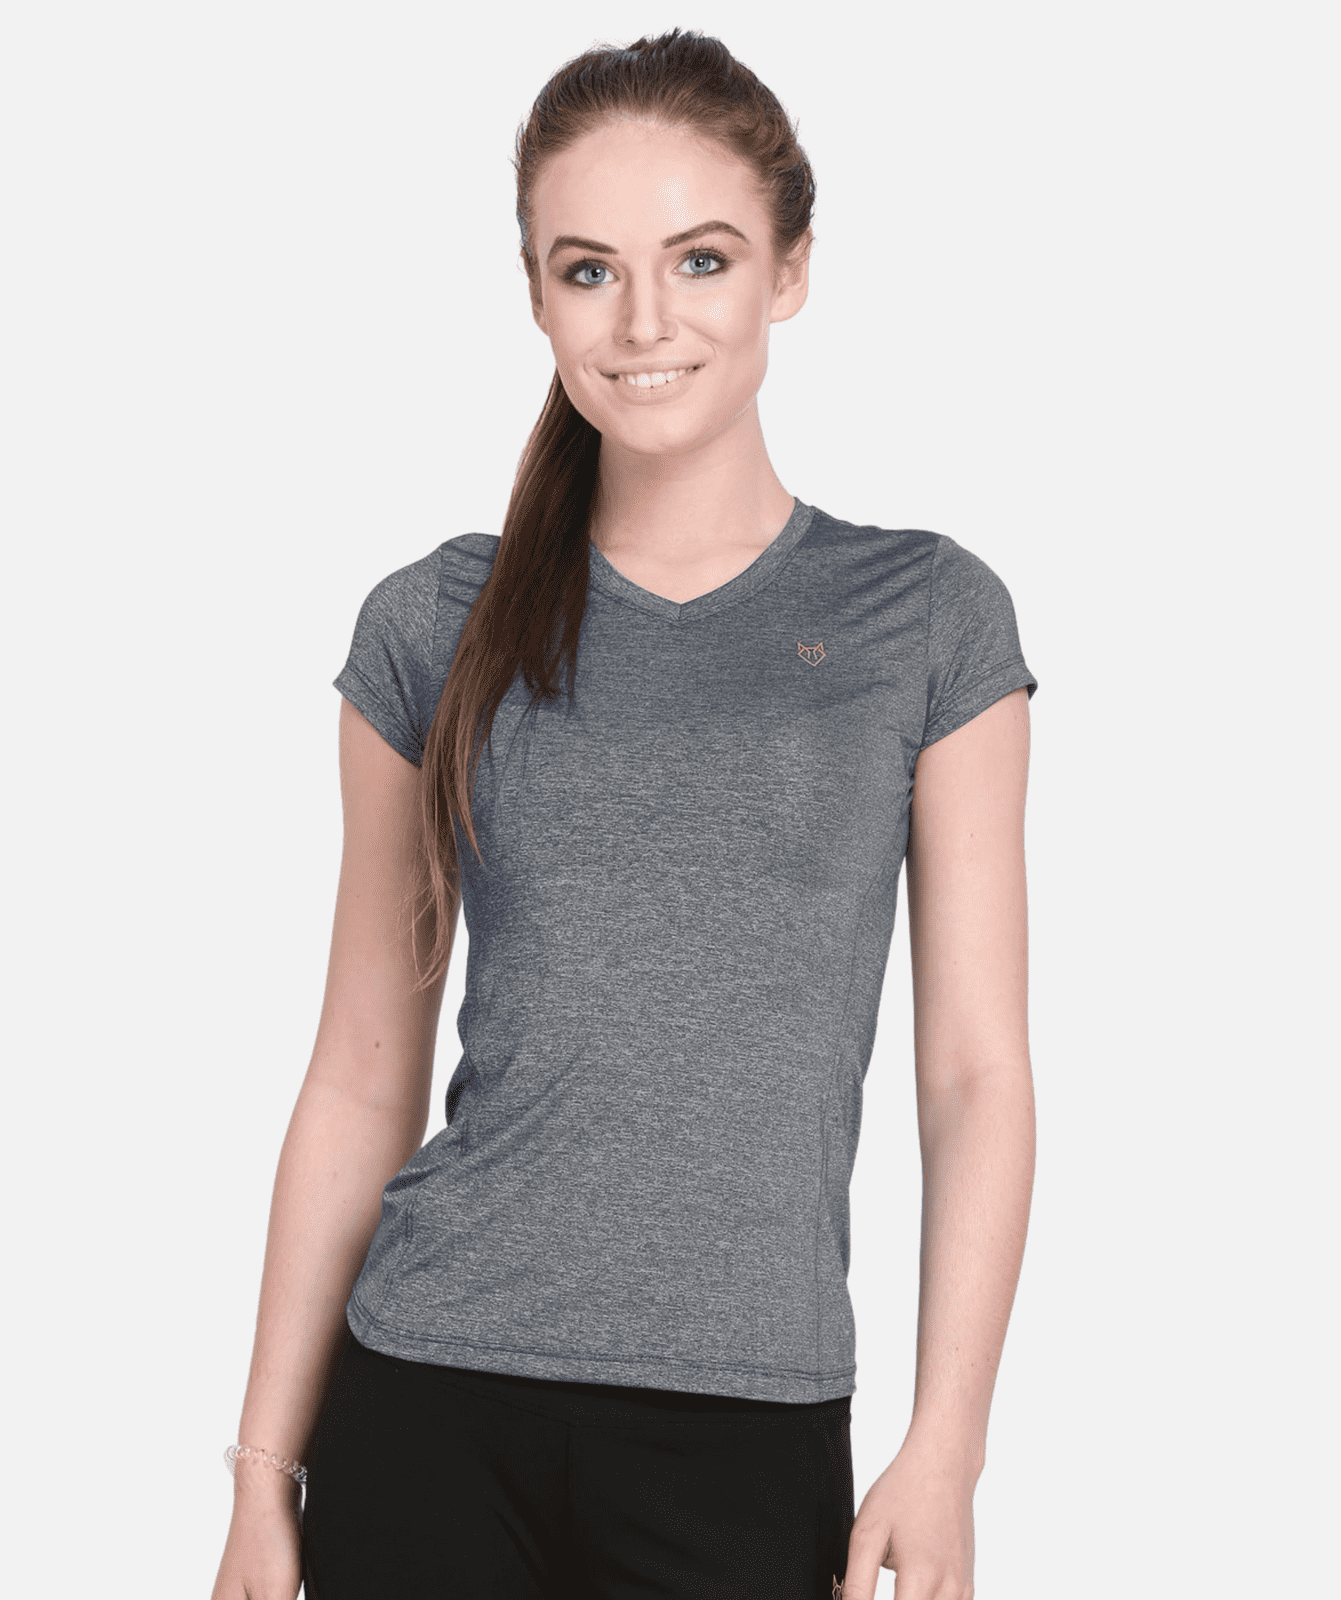 Yoga Top for Women | Cloud Nylon Fabric | Soft and Smooth Women's Upper